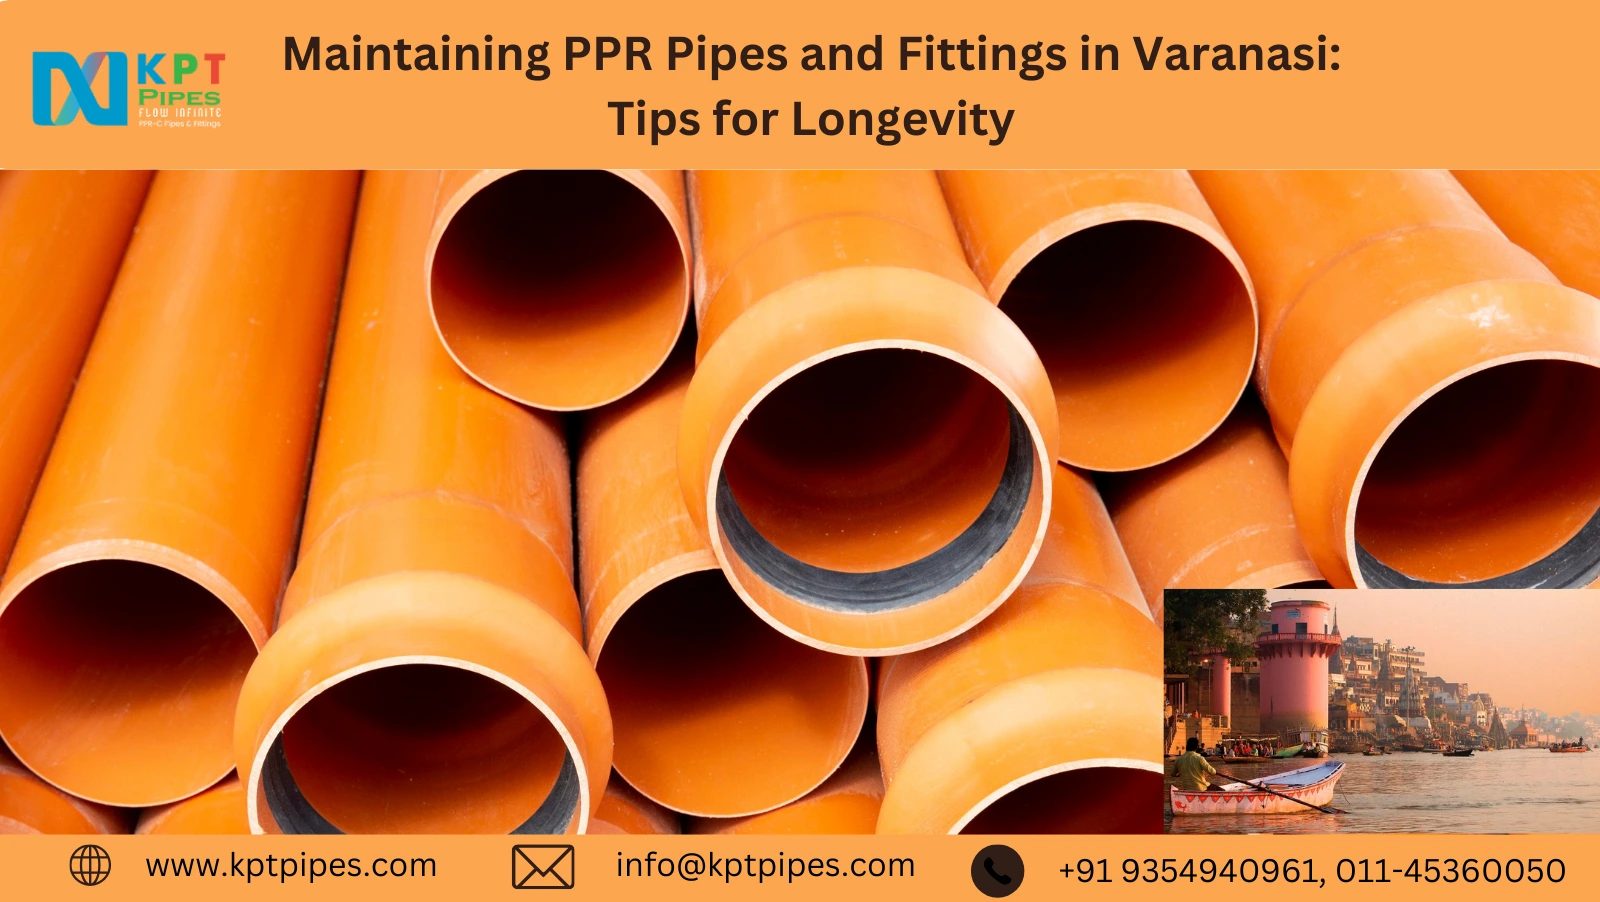 PPR Pipes and Fittings in Varanasi